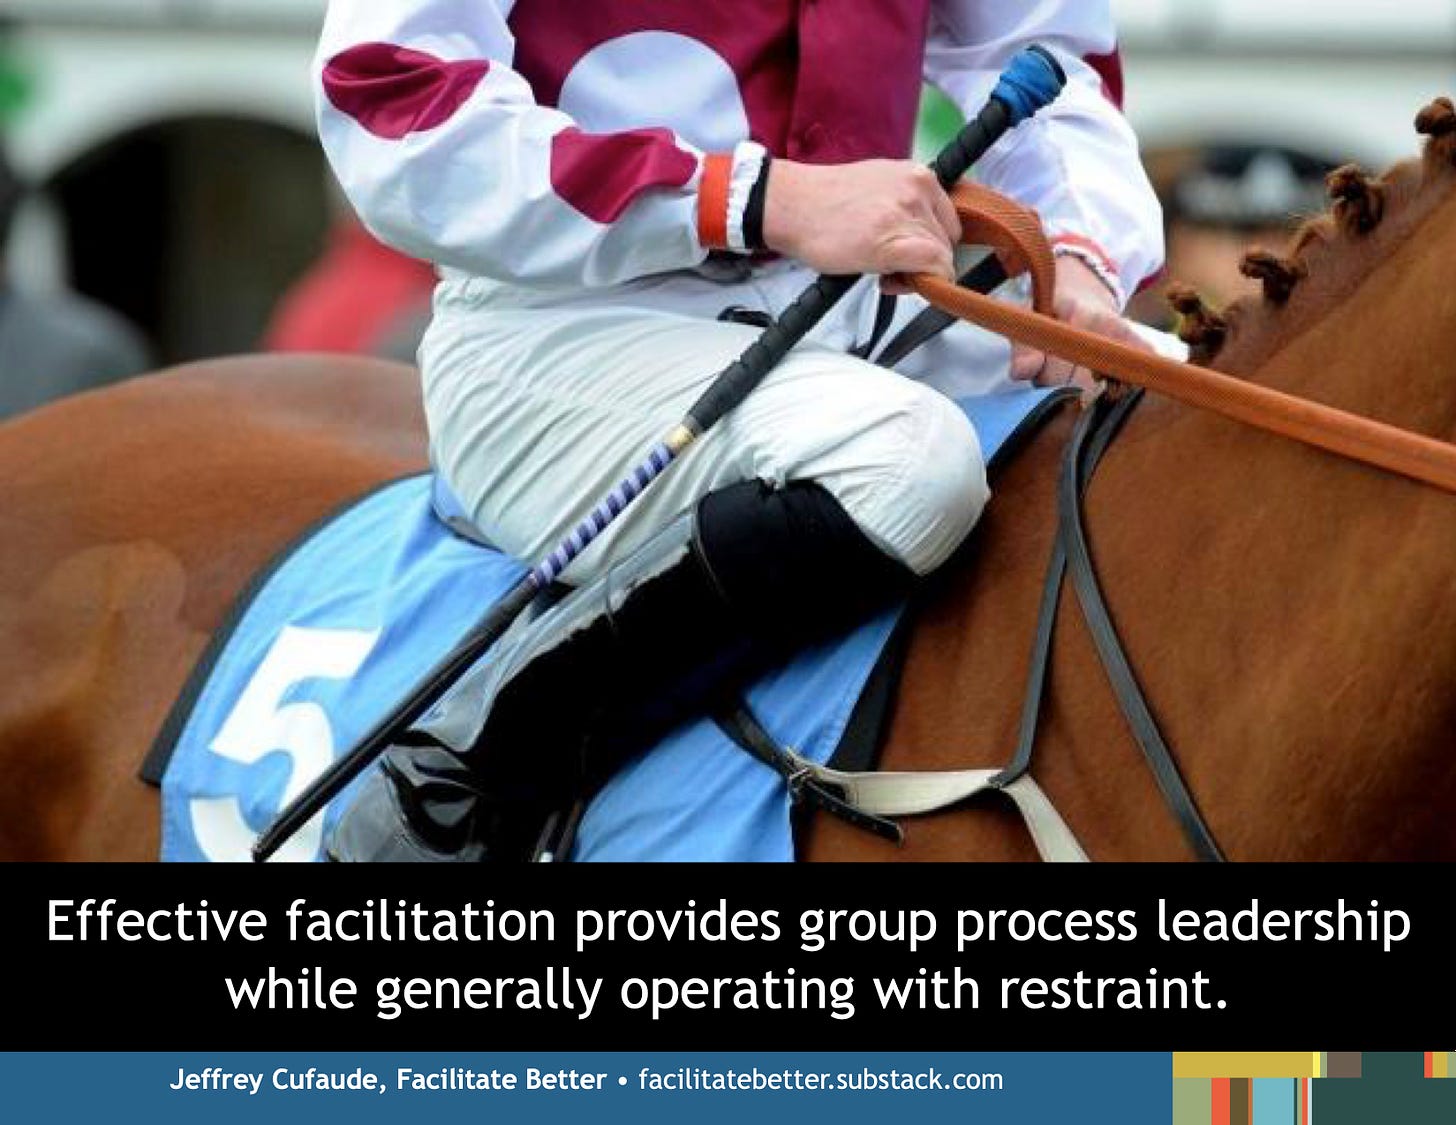 closeup of a jockey atop a stationary race horse with one hand holding both the bridle and a riding crop  text below: Effective facilitation provides group process leadership while generally operating with restraint.